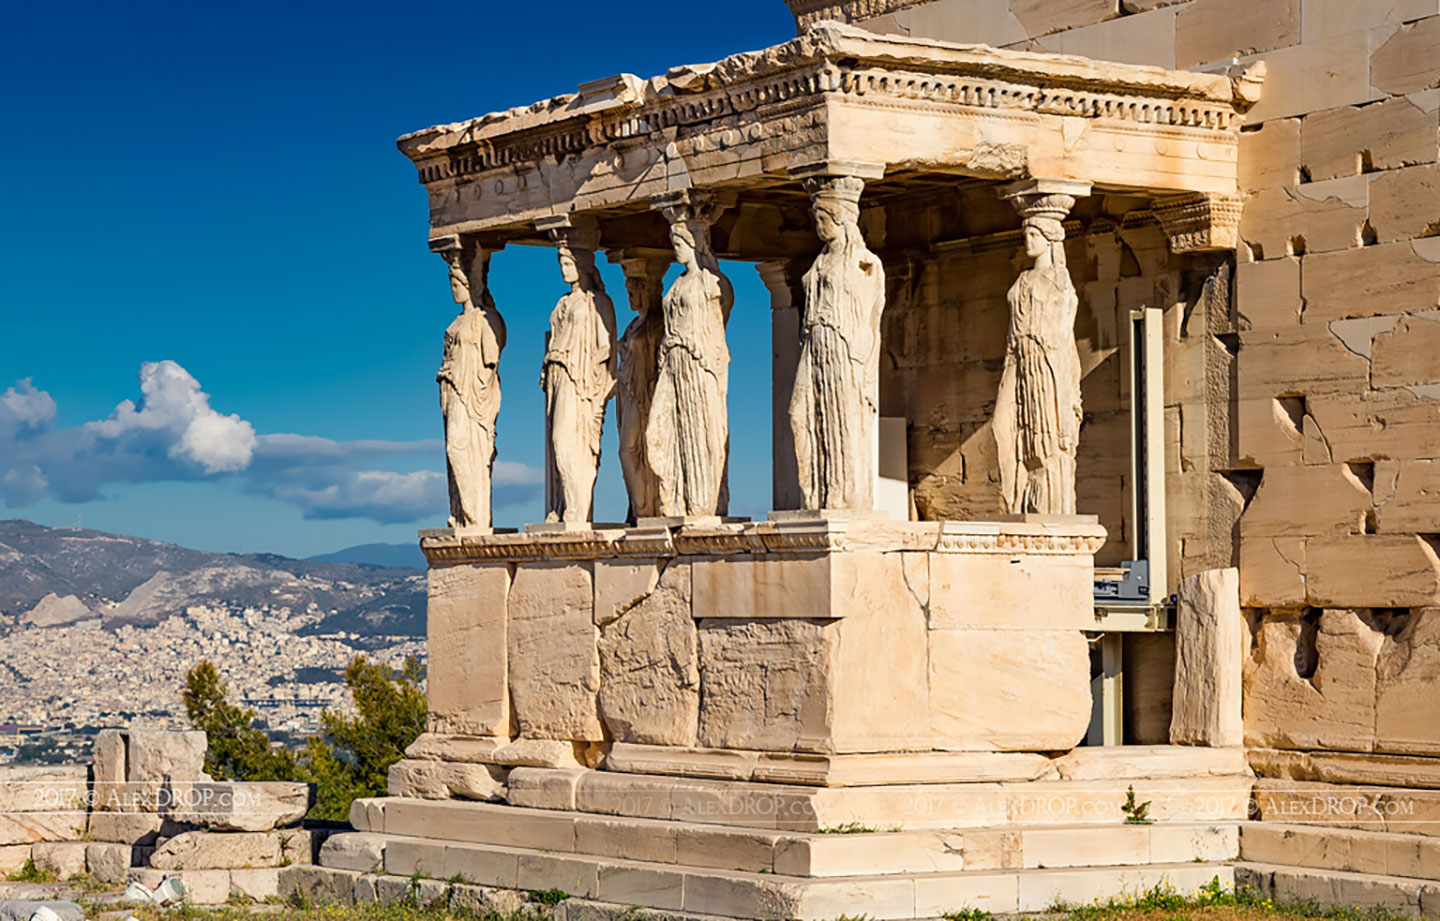 The Caryatid Porch of the Erechtheion, the temple of Athena Polias, on the Acropolis in Athens, Greece.